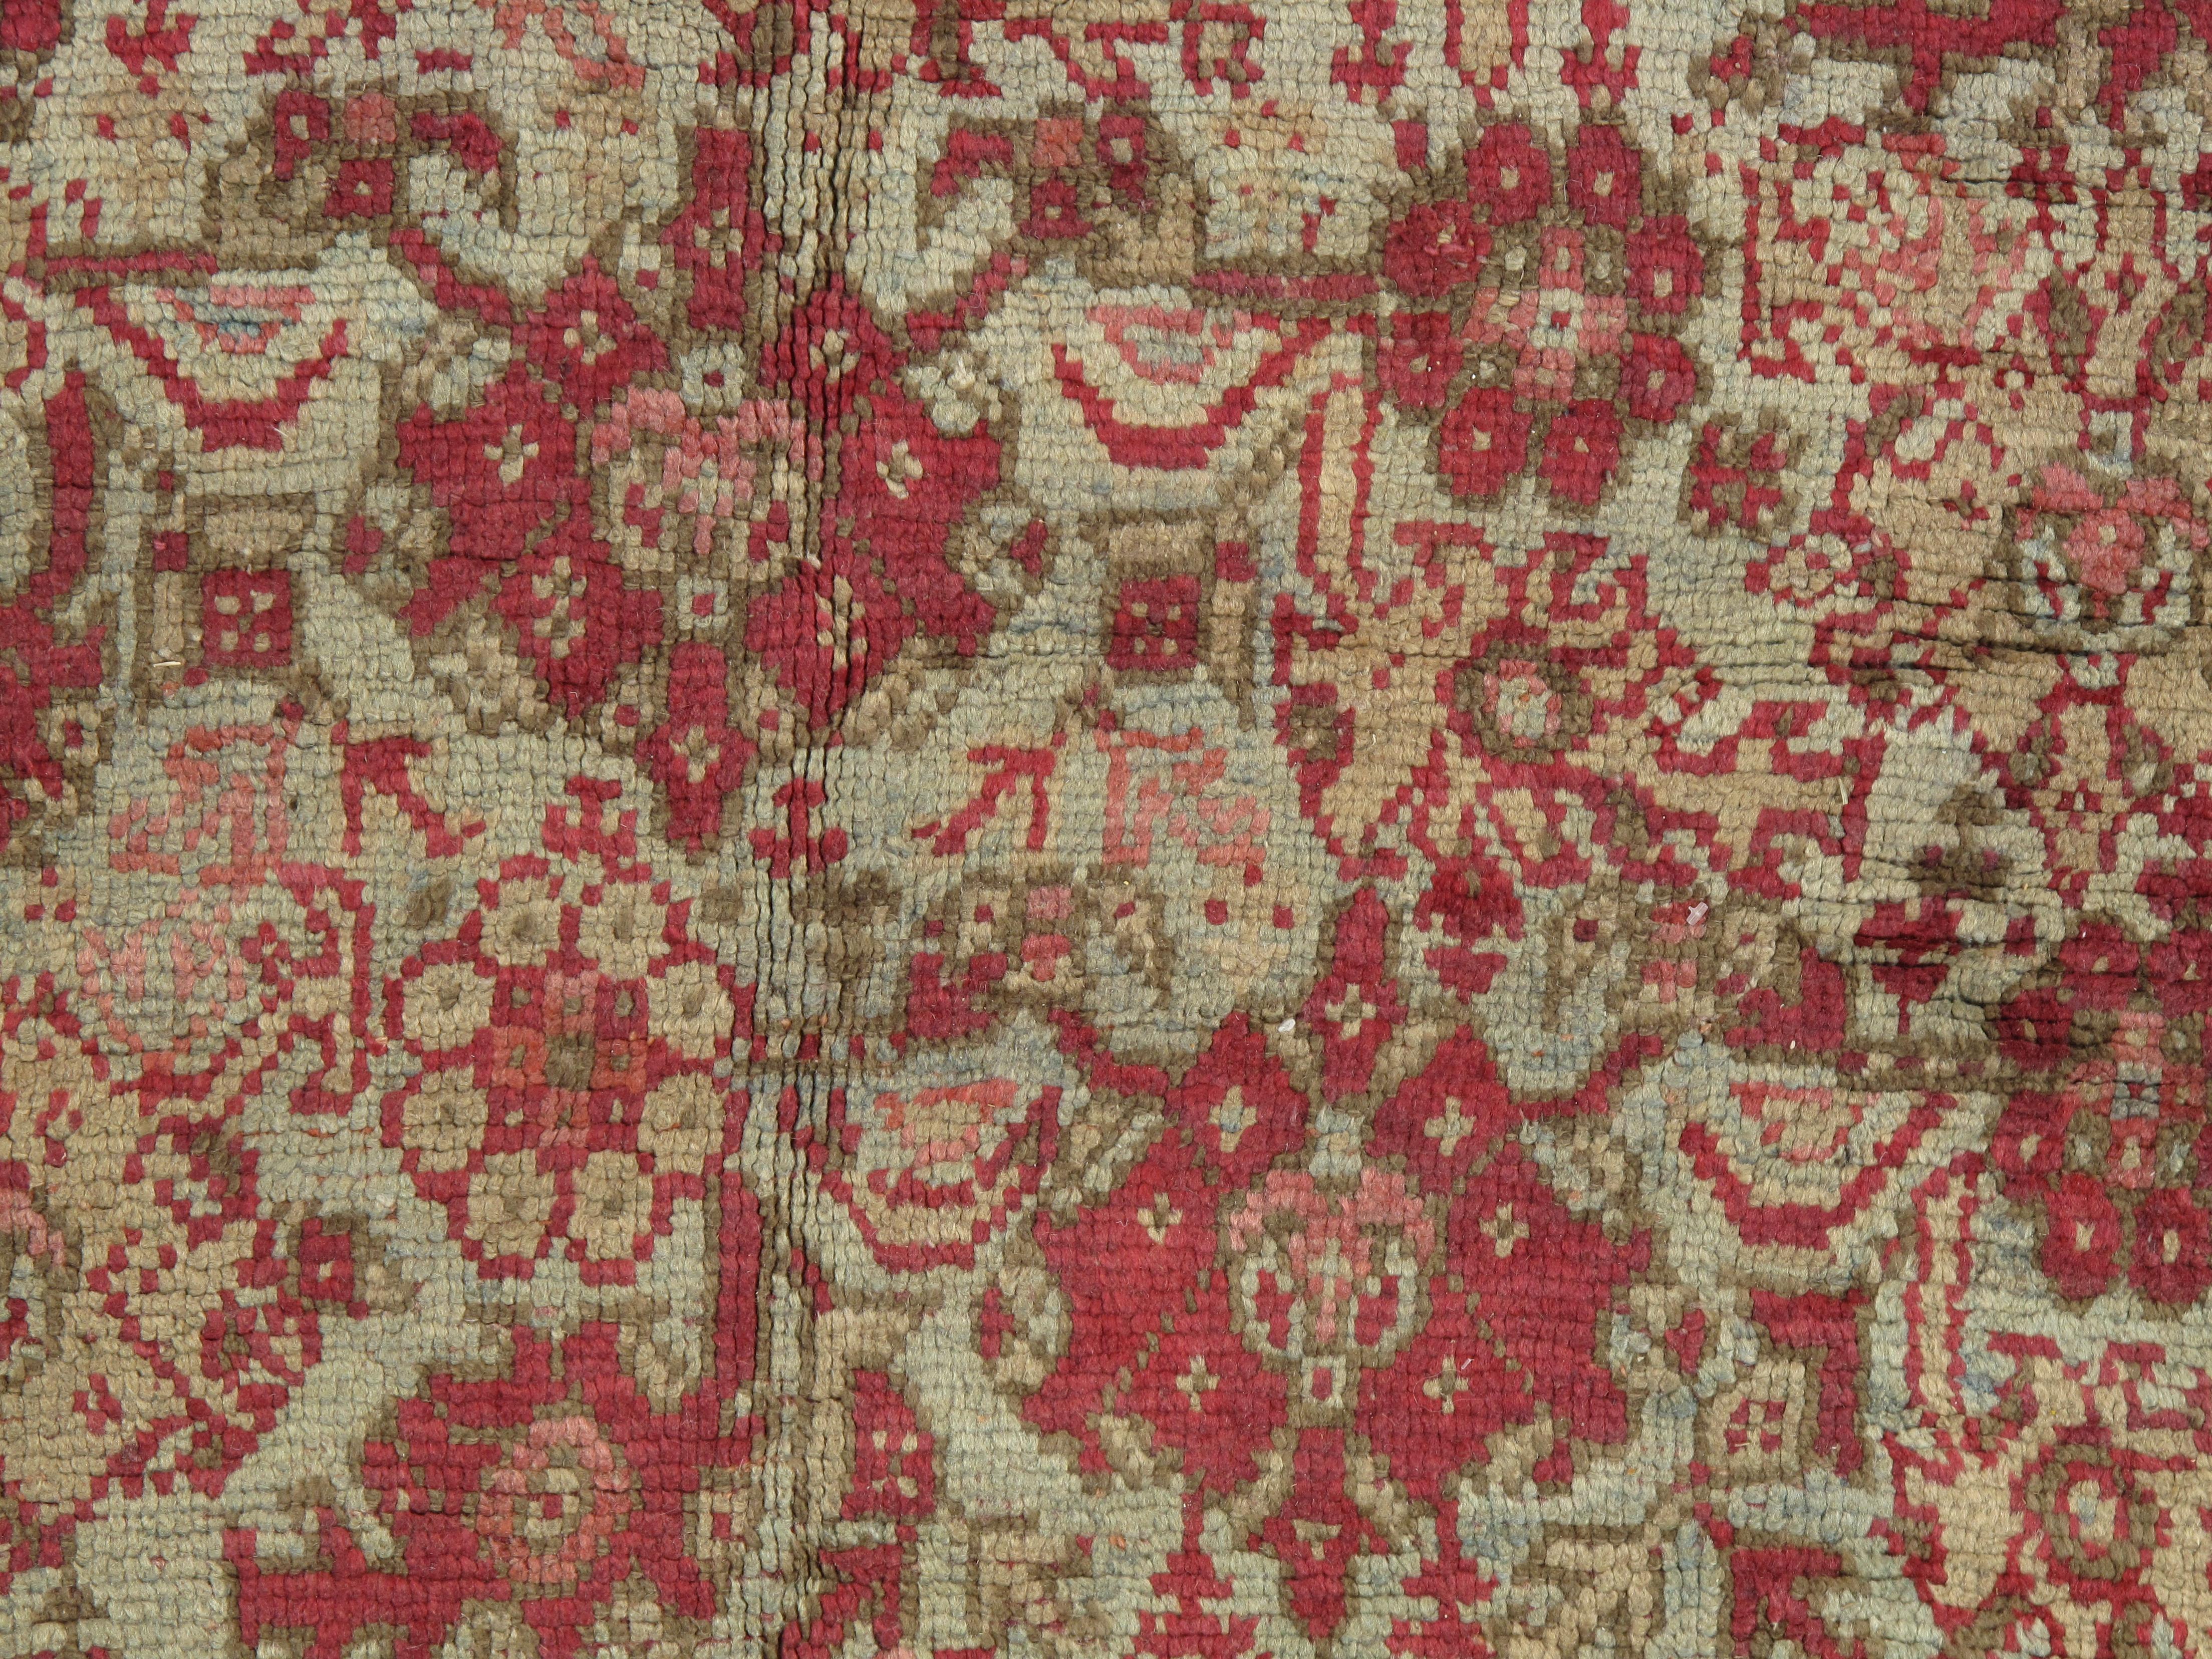 Antique Oushak Carpet, Handmade Oriental Rug, Pale Light Blue, Coral, Raspberry In Excellent Condition For Sale In Port Washington, NY